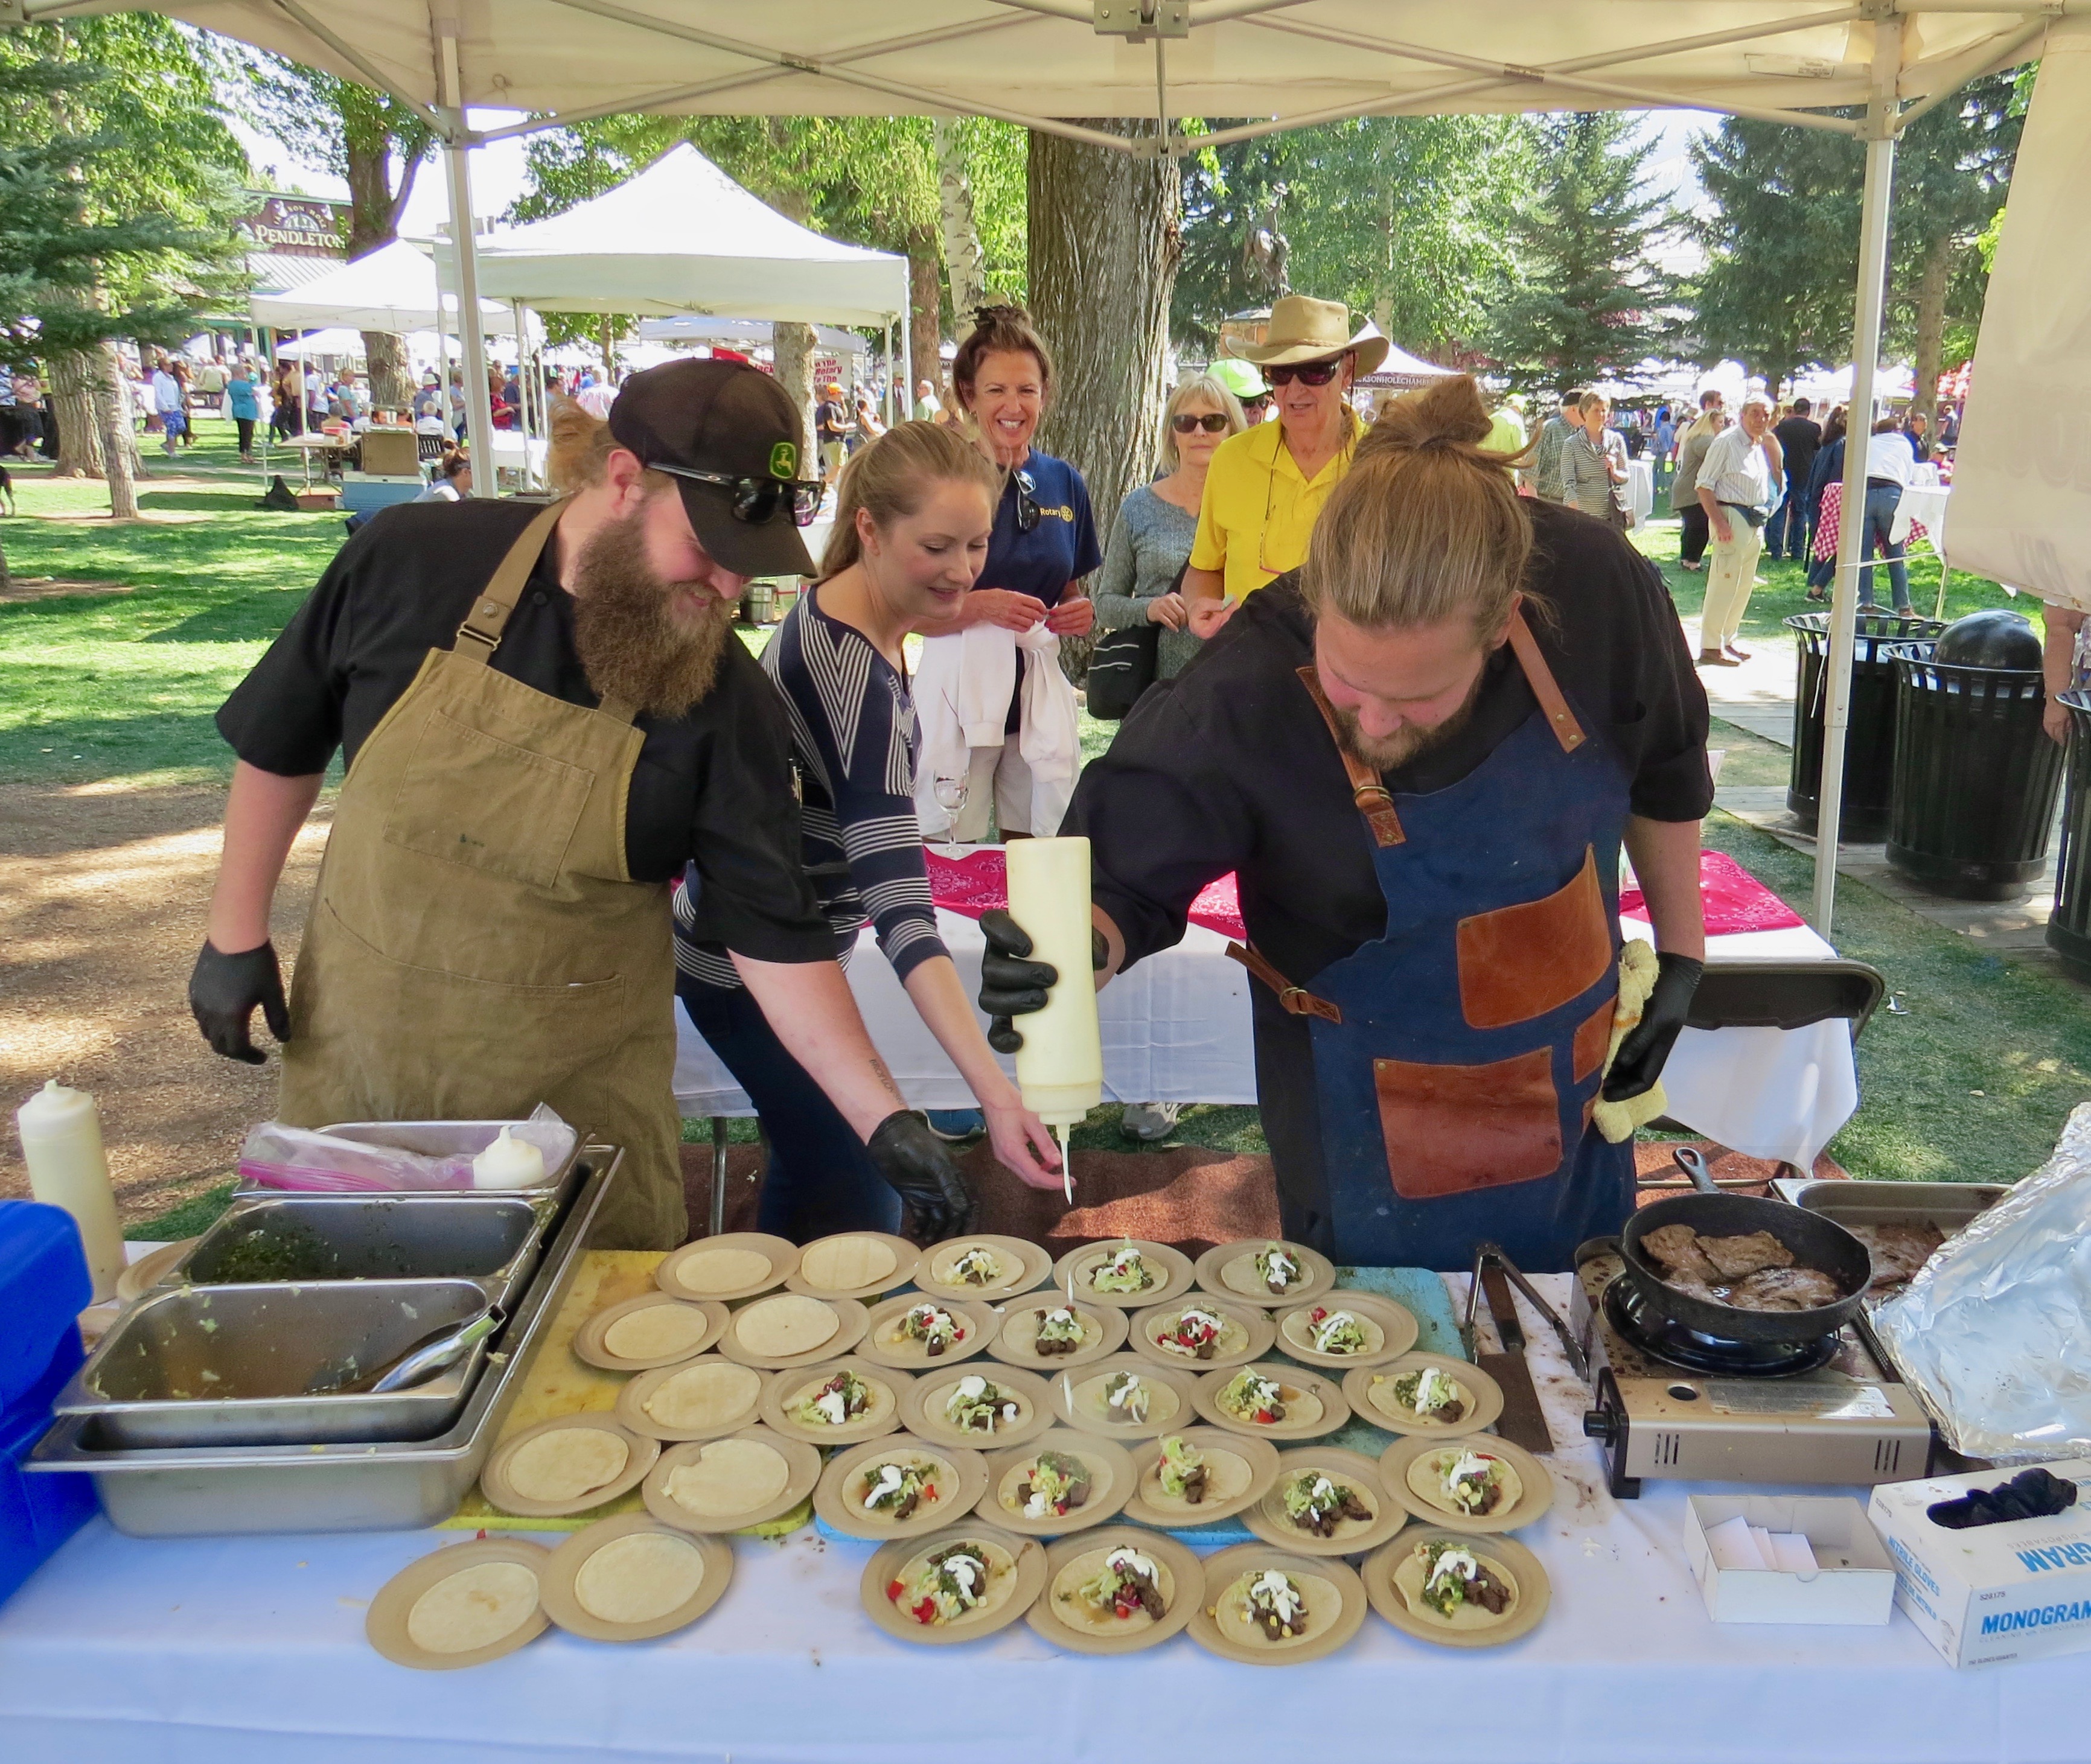 Chefs’ creations during the Taste of the Tetons are always a crowd-pleaser with the open air tasting fair showcasing the culinary arts each September.